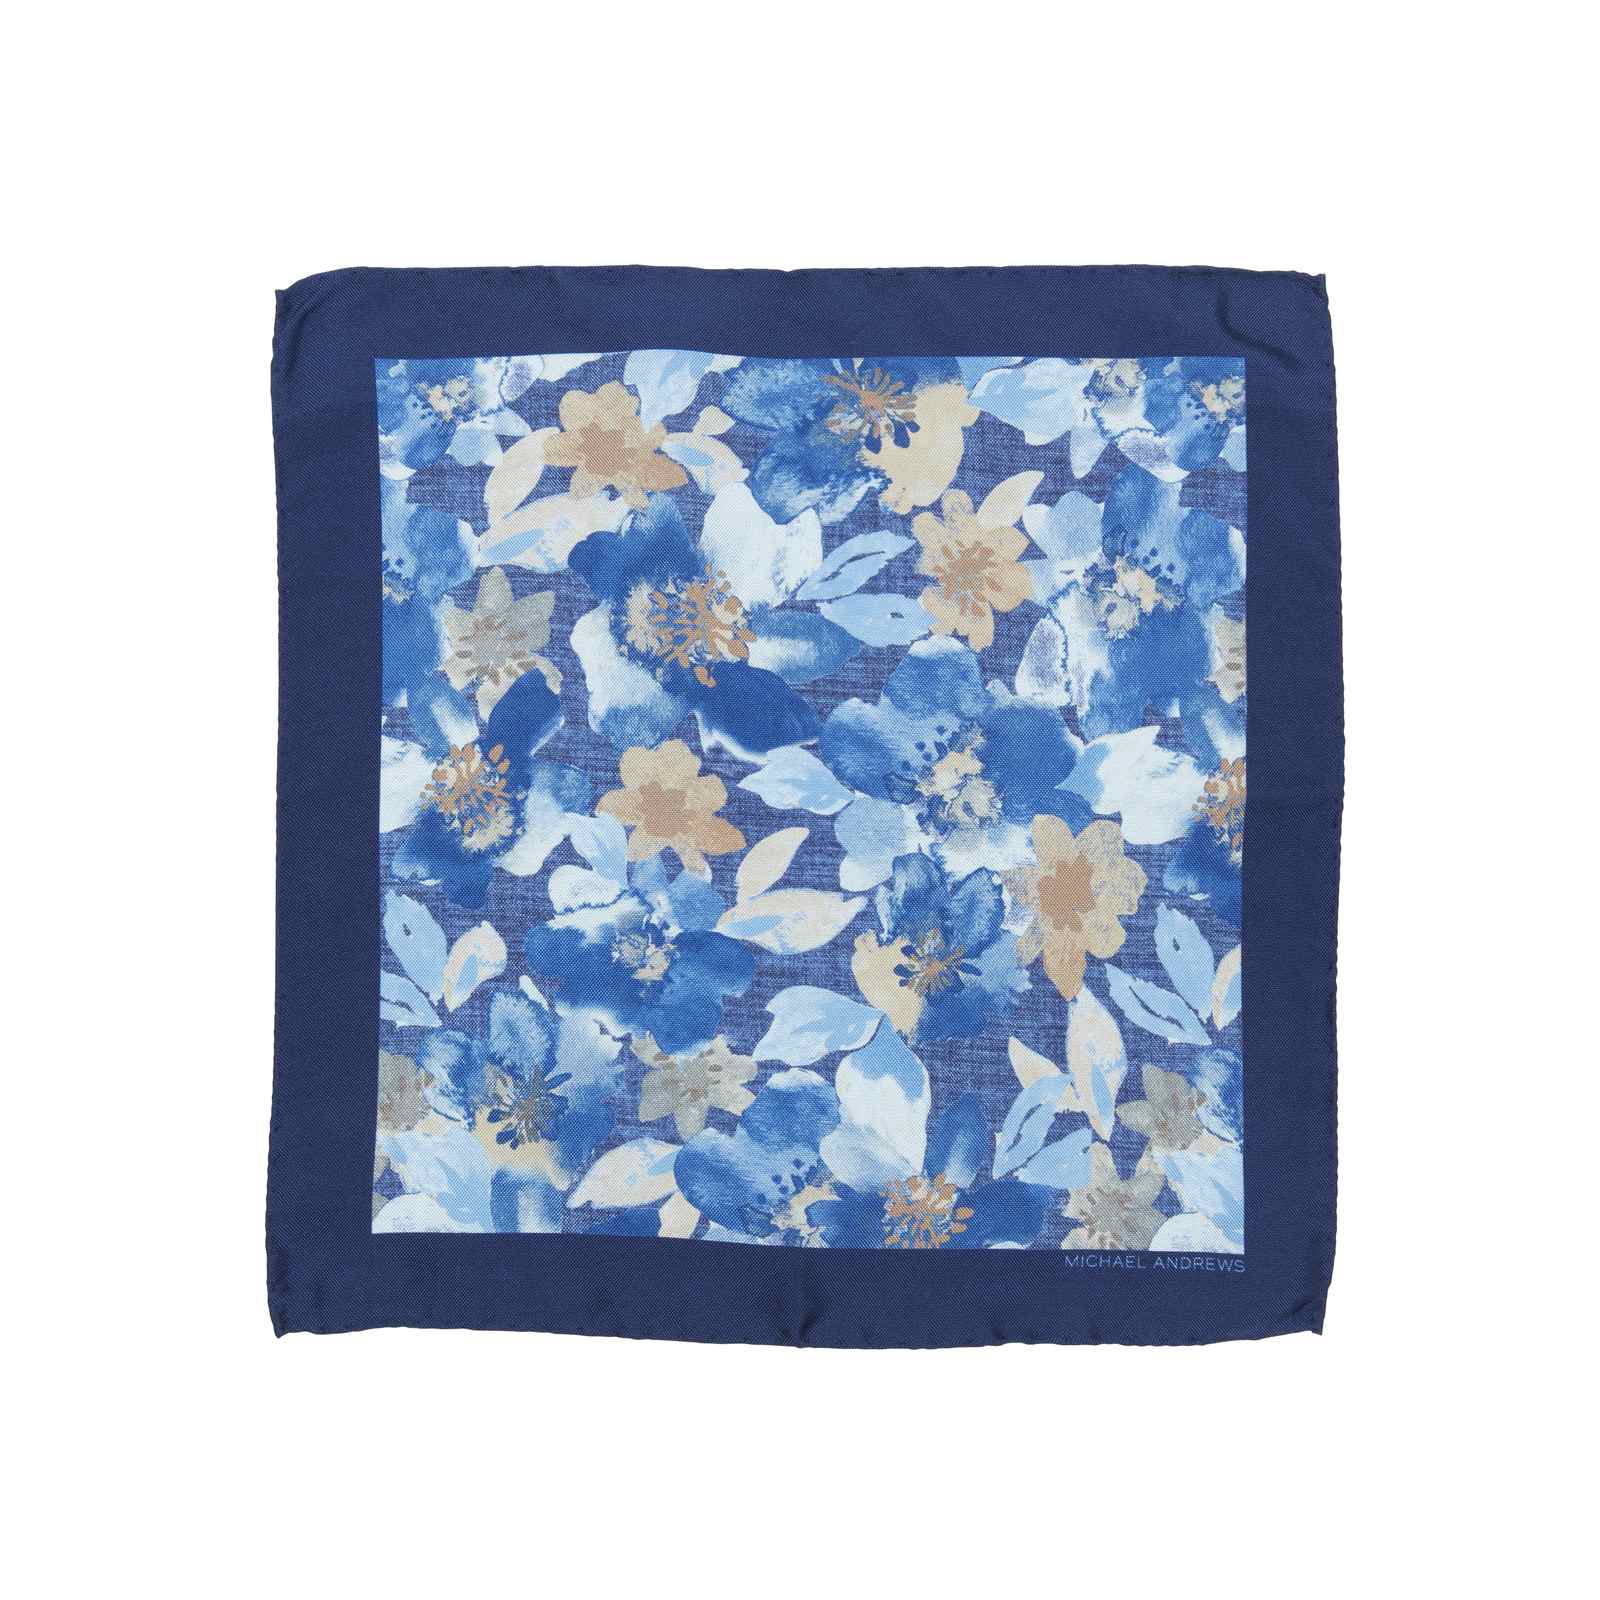 Royal and Light Blue Watercolor Floral Pocket Square